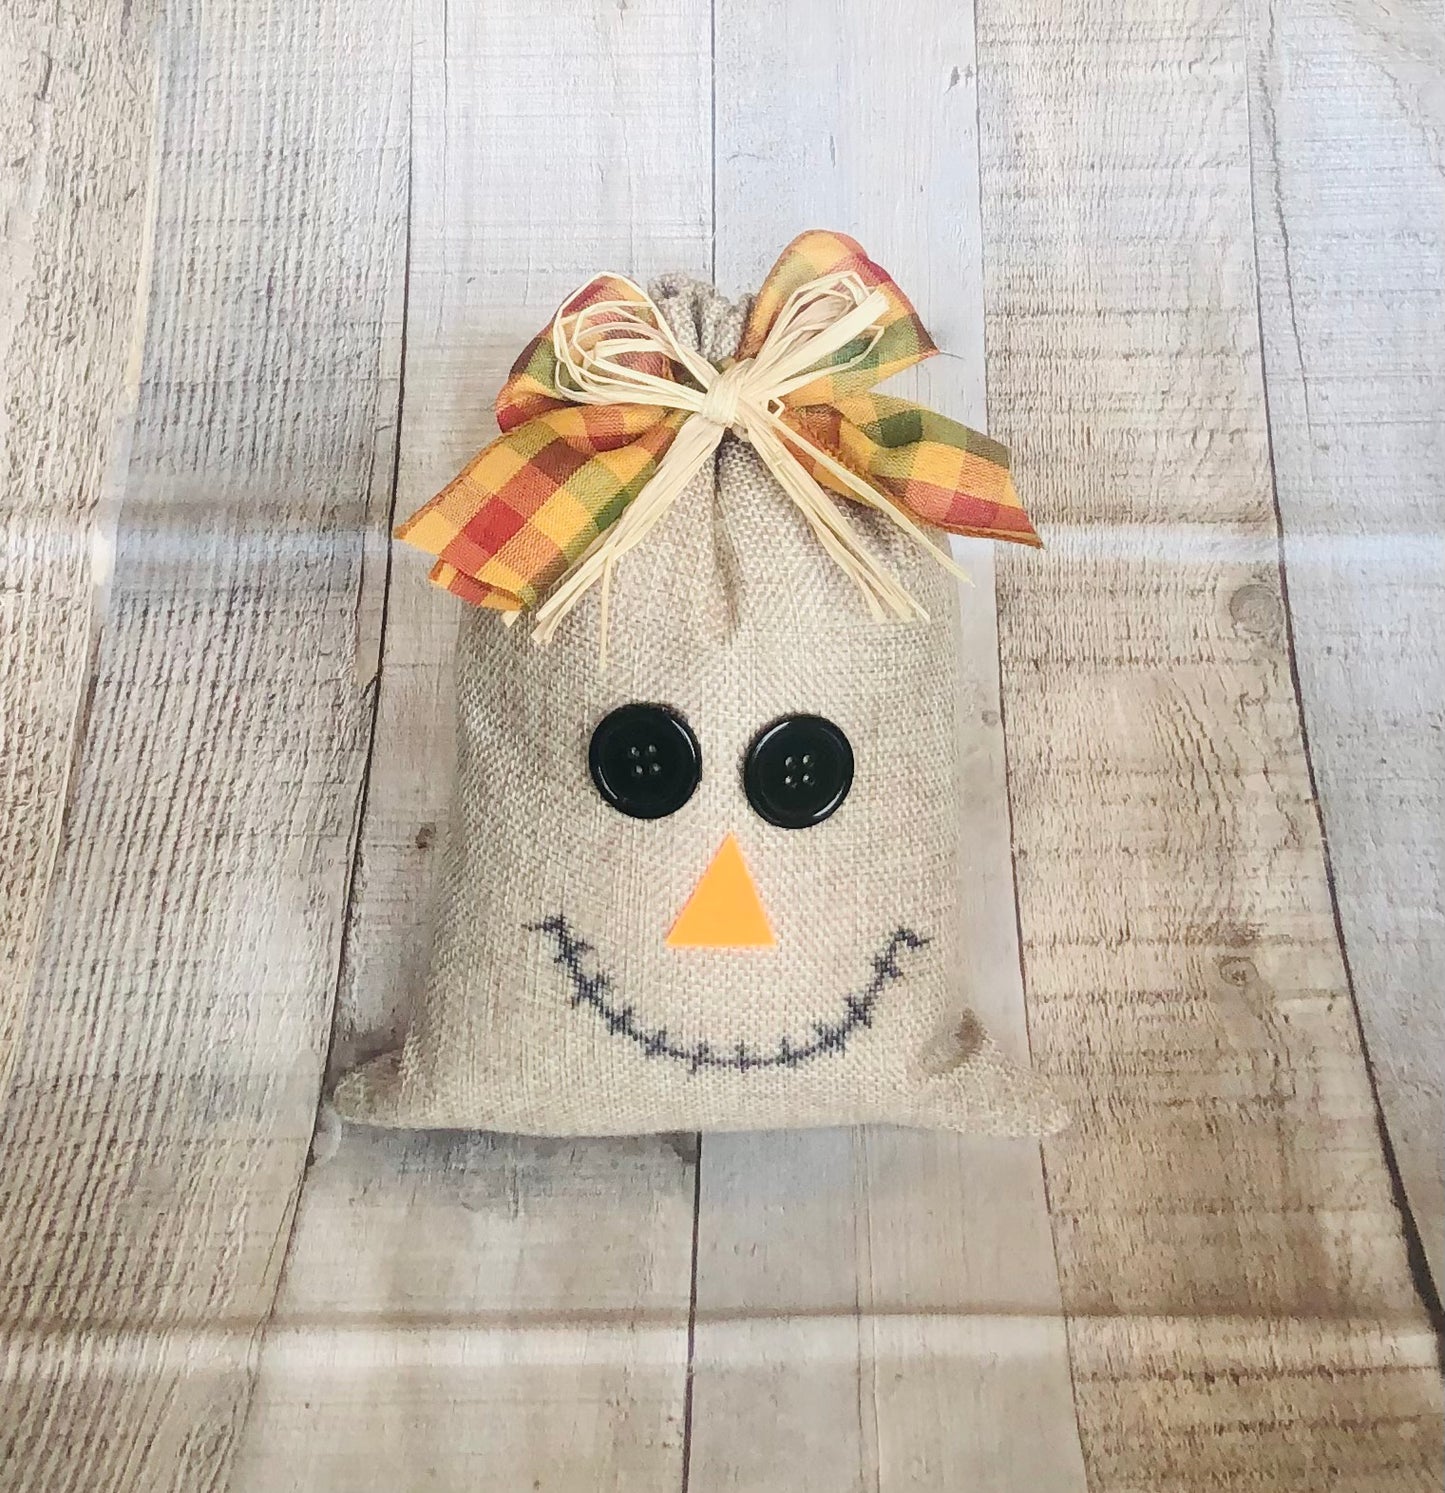 Burlap Bag Scarecrow Craft Kit from Seniorly Creations. This is a picture of the completed craft with plaid and raffia bow at the top, buttons for eyes, felt for nose. 